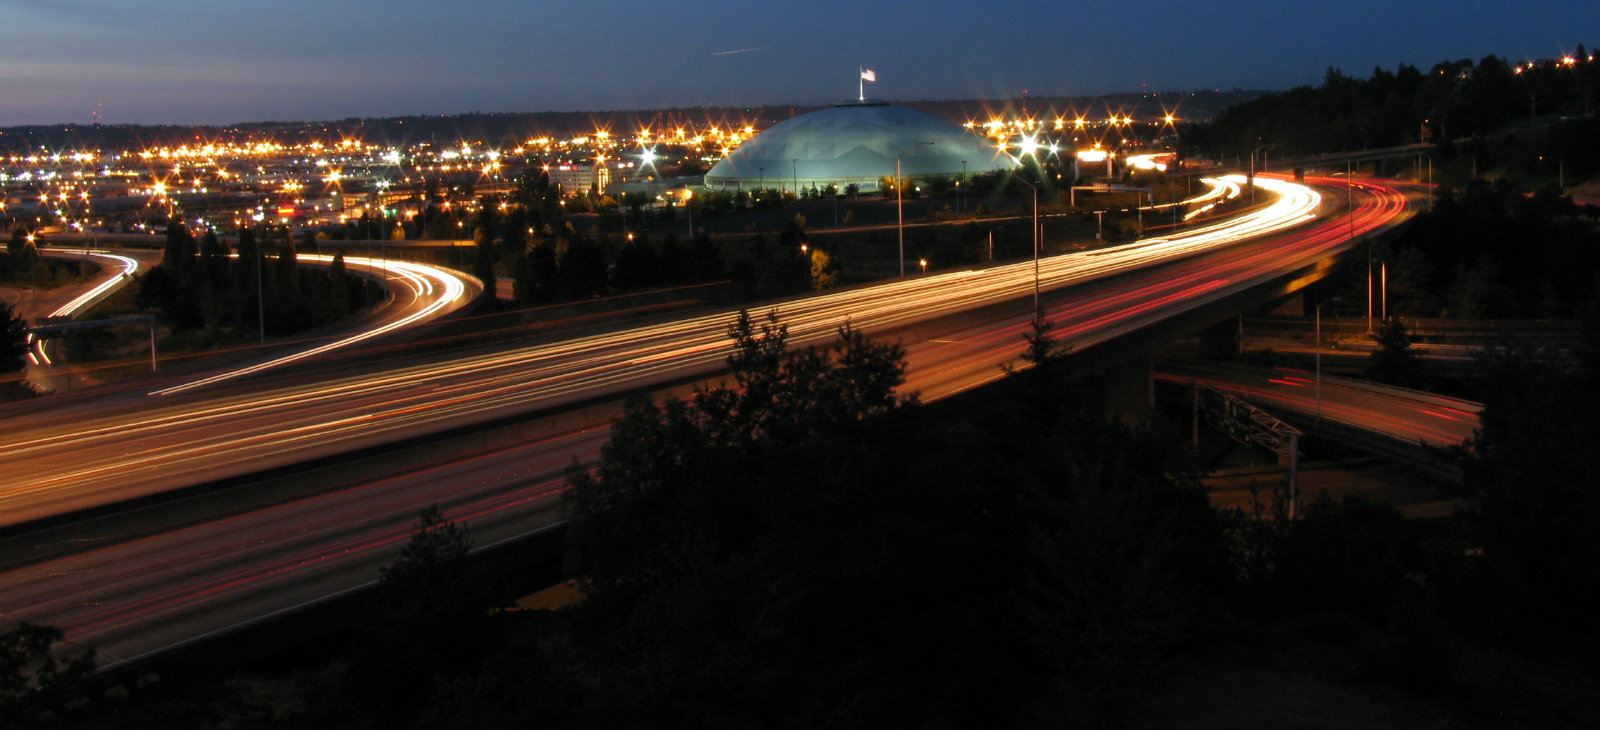 timelapse image of Tacoma Dome at night